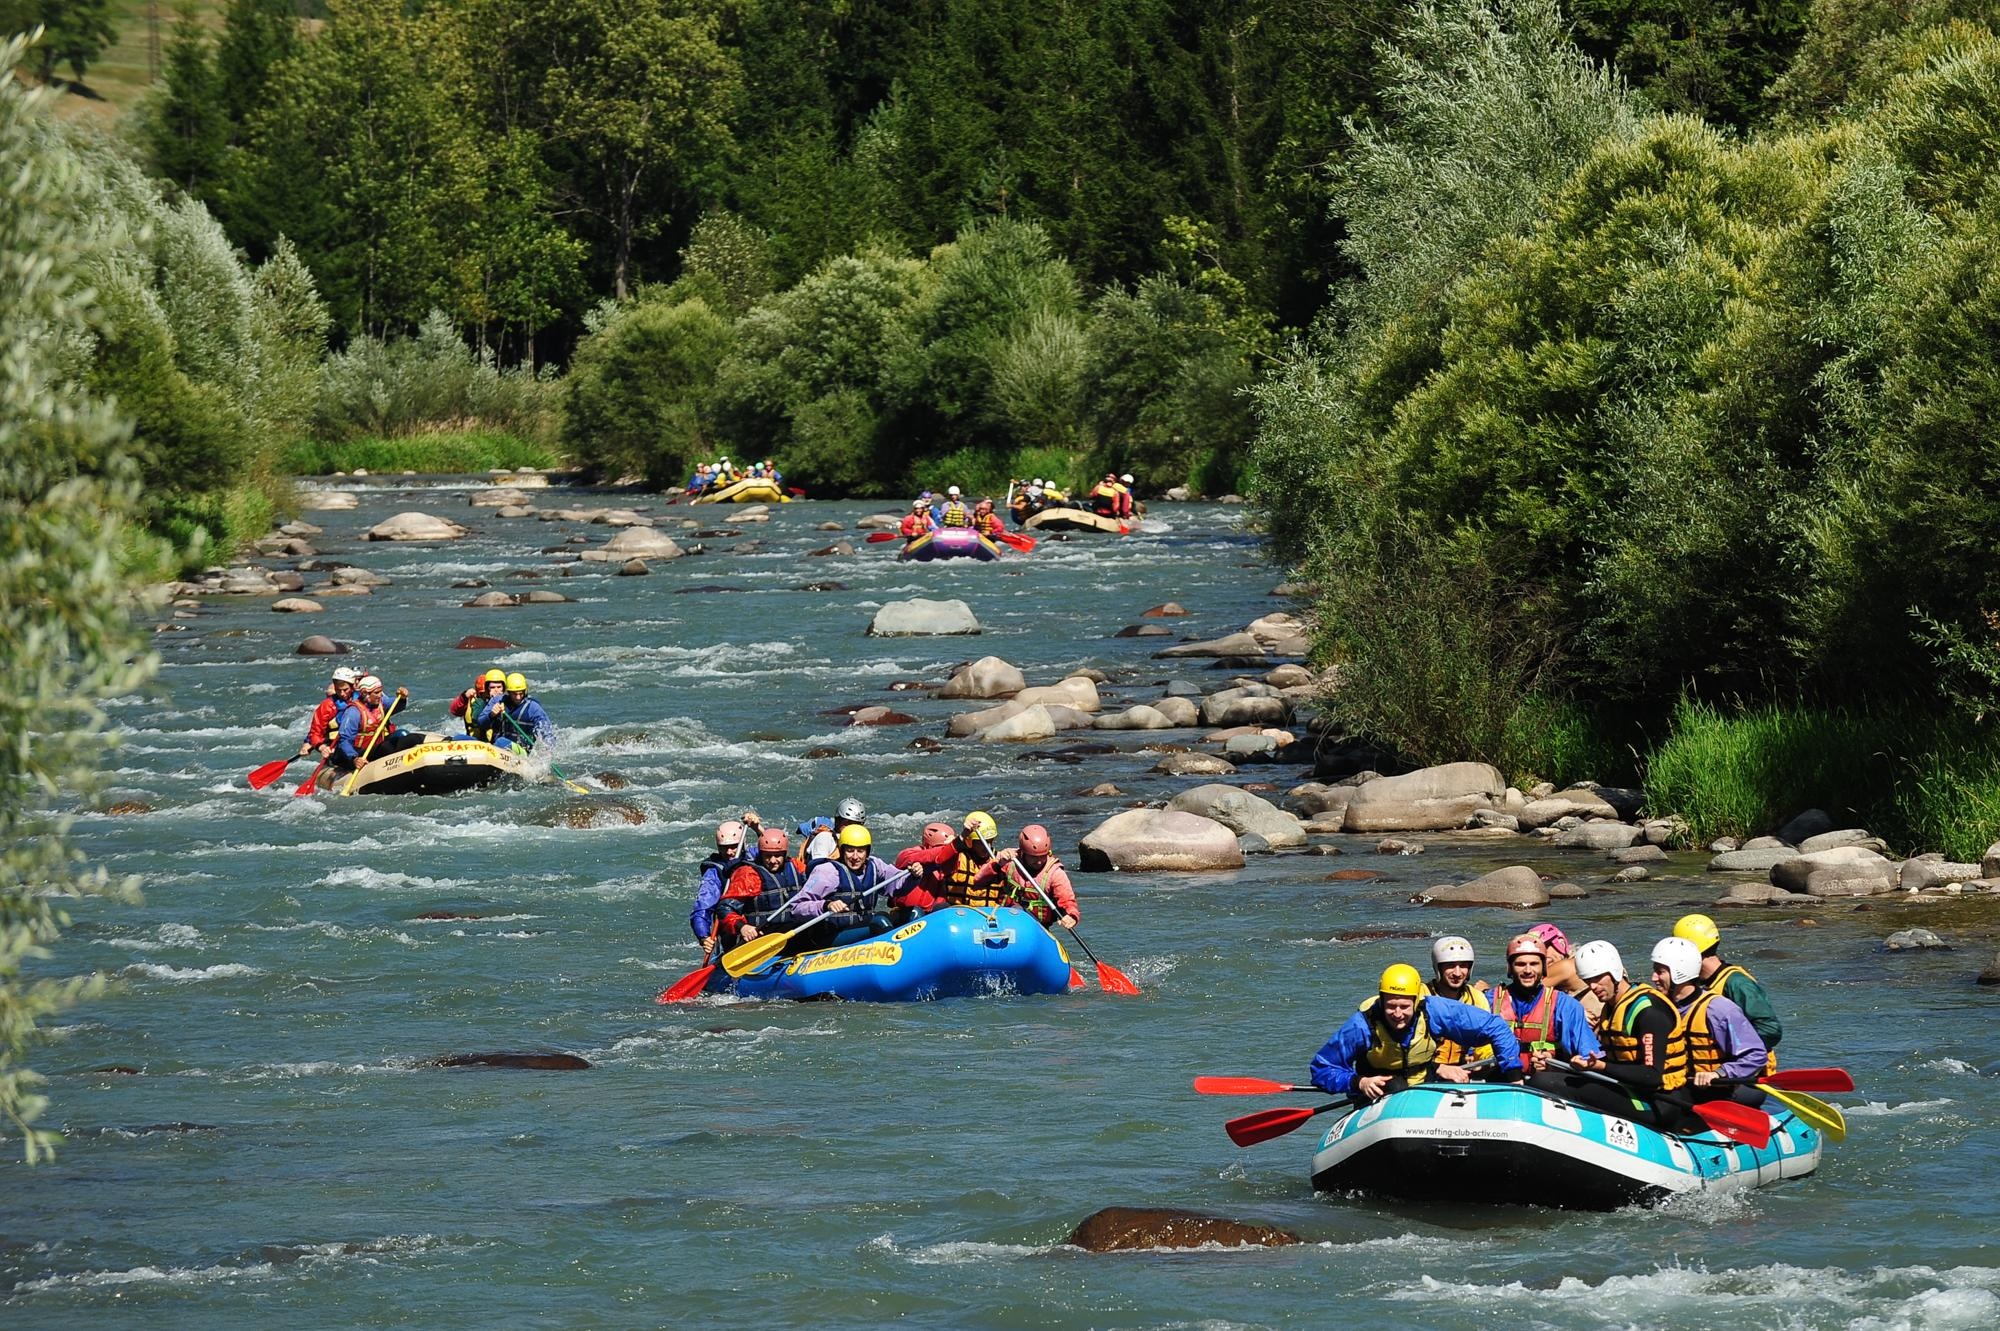 Rafting: Straightforward rapids with wide and clear channels, Amateur level of a group whitewater boating. 2000x1340 HD Background.